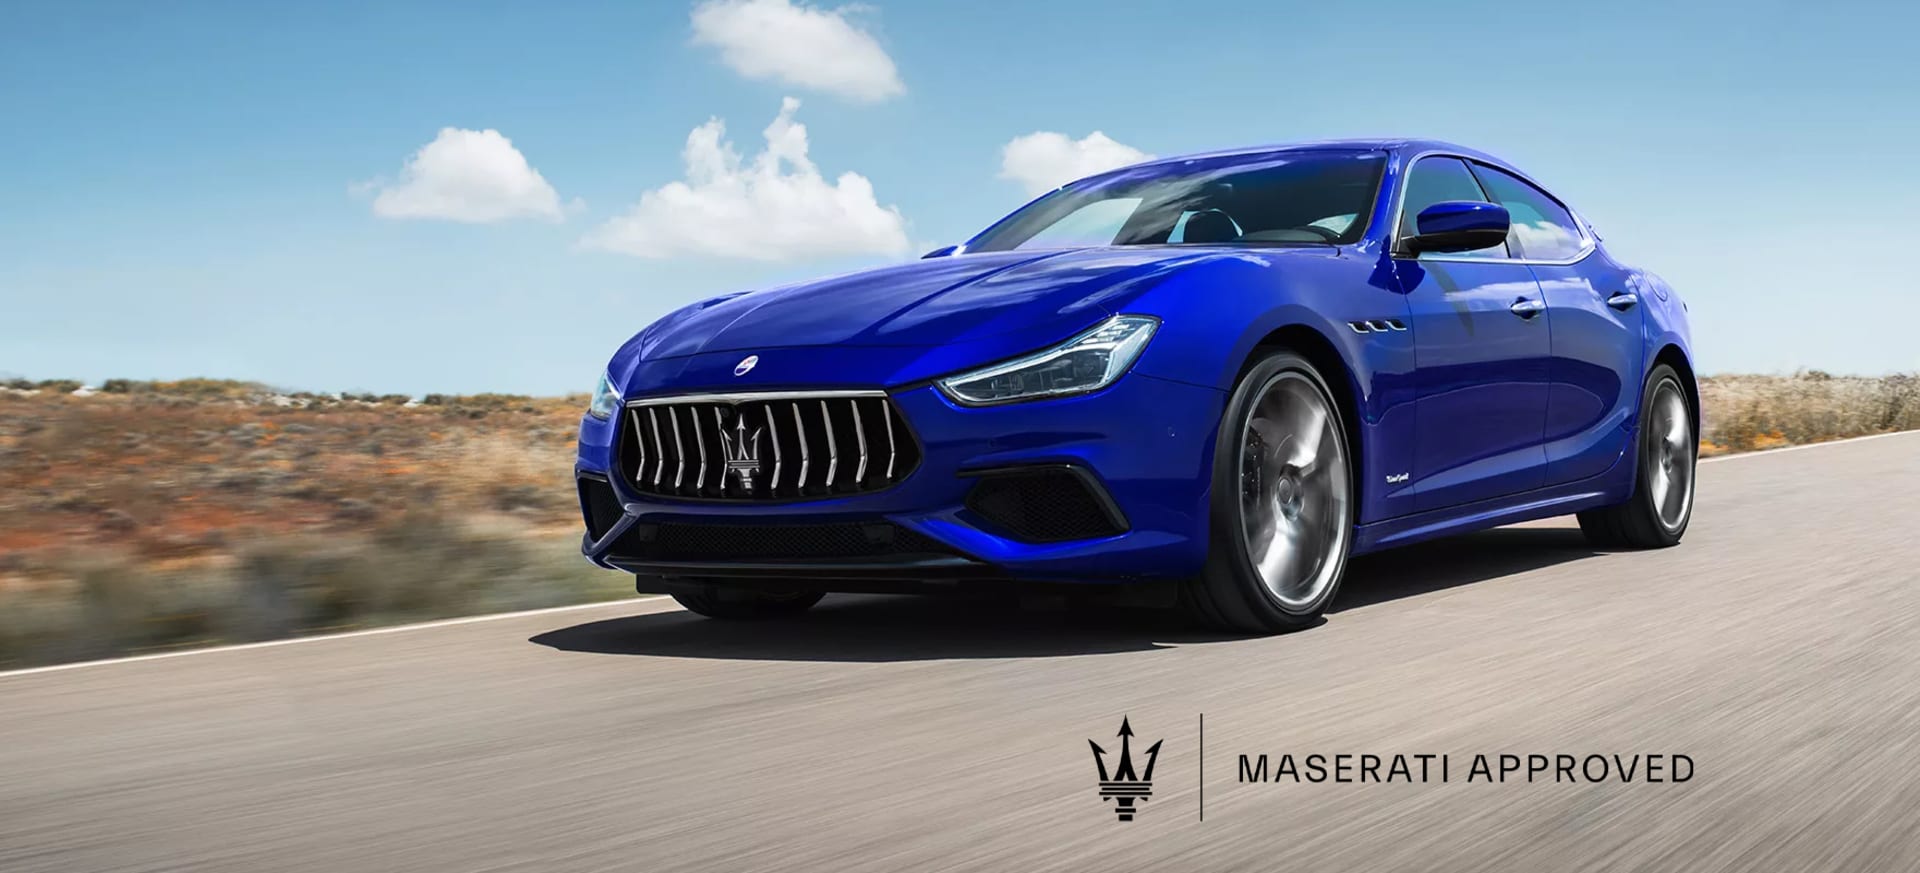 A certified pre-owned Maserati is the best pre-driven Maserati you can buy.